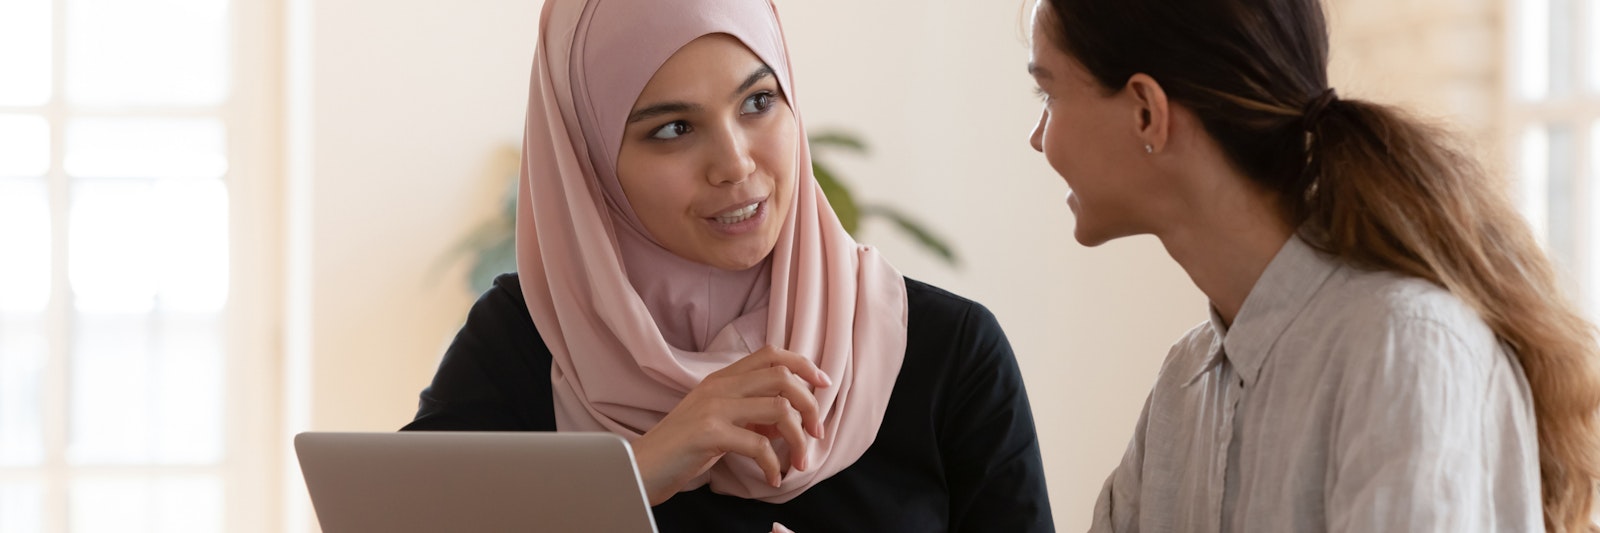 woman with headscarf and laptop talking with colleague